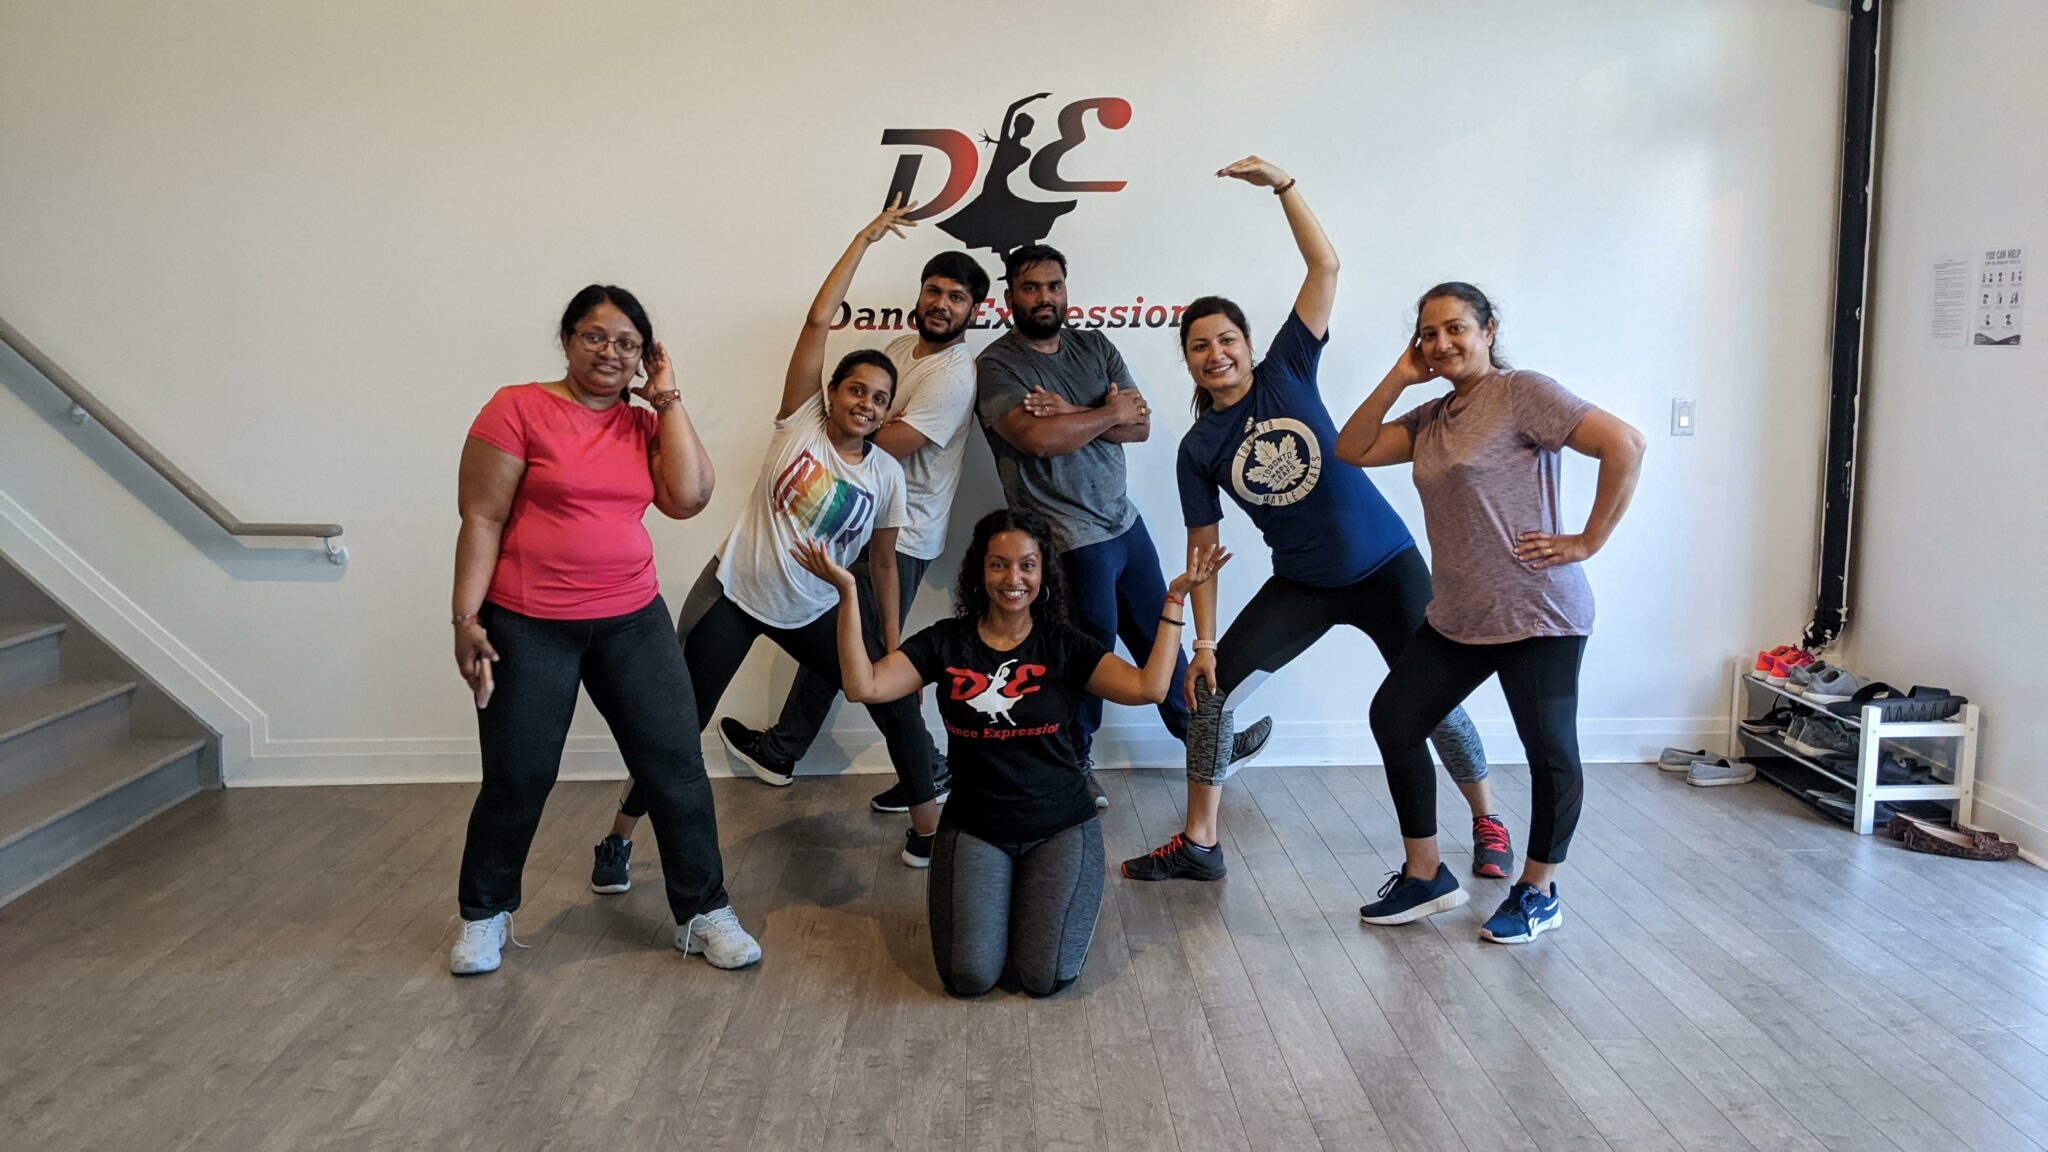 A group of adults posing with playful expressions and dance-inspired gestures in Dance Expression Studio, wearing casual workout clothes and sneakers. Behind them, the wall features the Dance Expression logo, indicating the lively and inclusive atmosphere of the dance class they are attending.